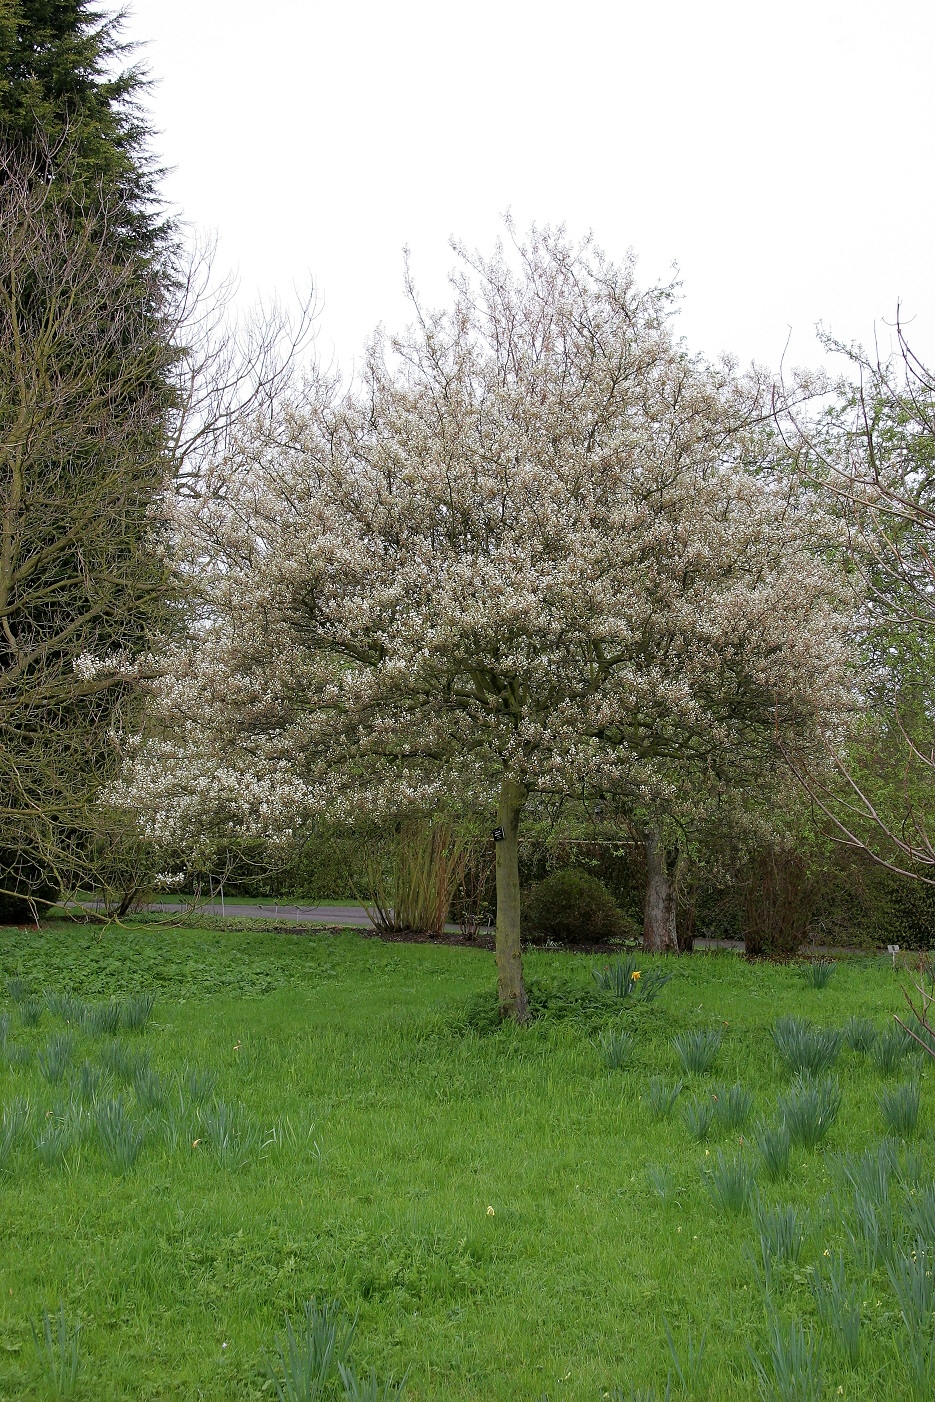 The sunning sprng display of white flowers of Amelanchier lamarckii